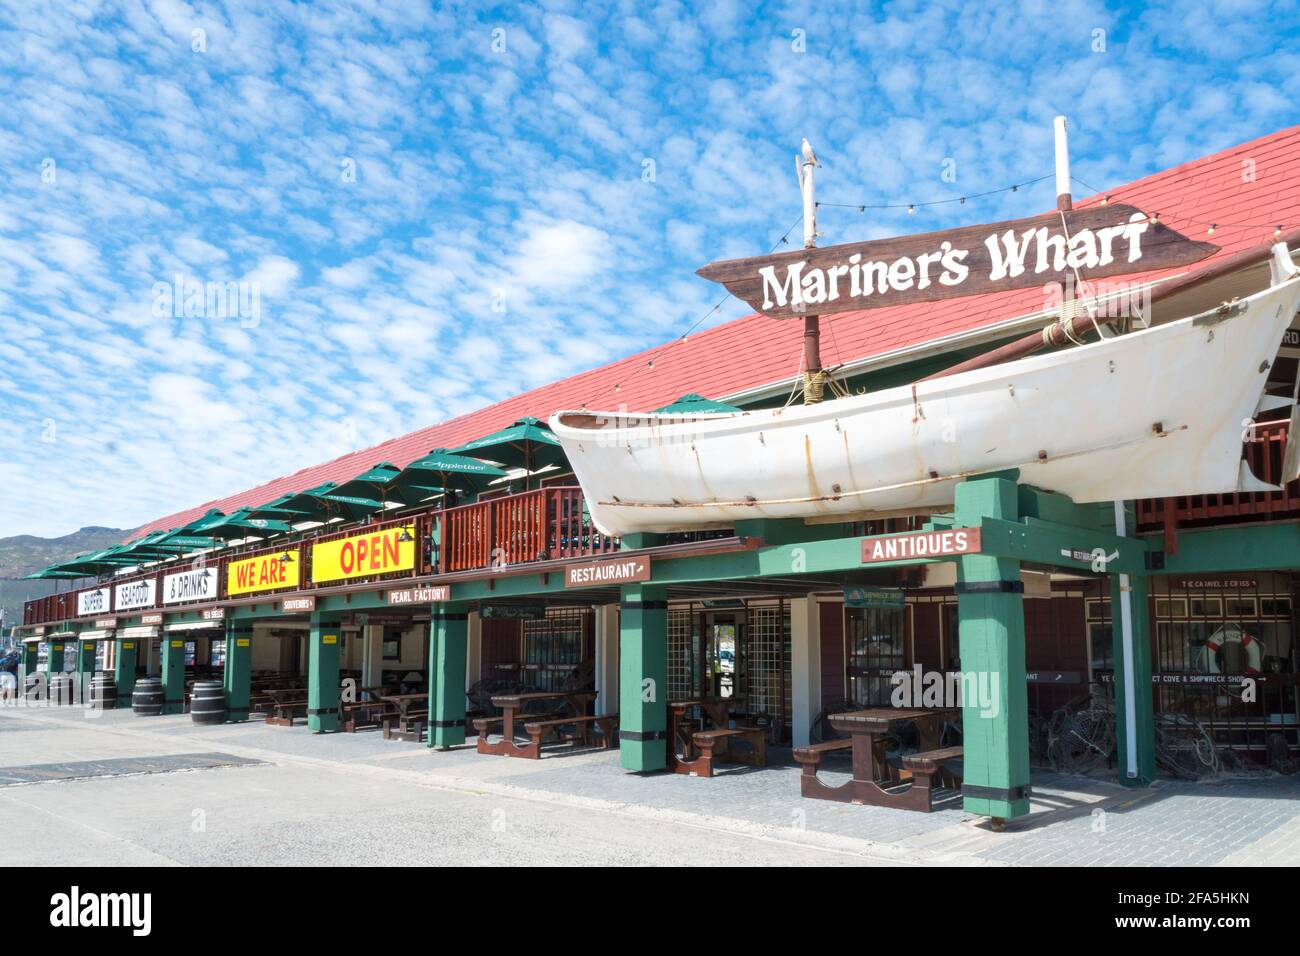 Mariners Wharf in Hout Bay harbour, Cape Town, South Africa which is a tourist destination and restaurant Stock Photo